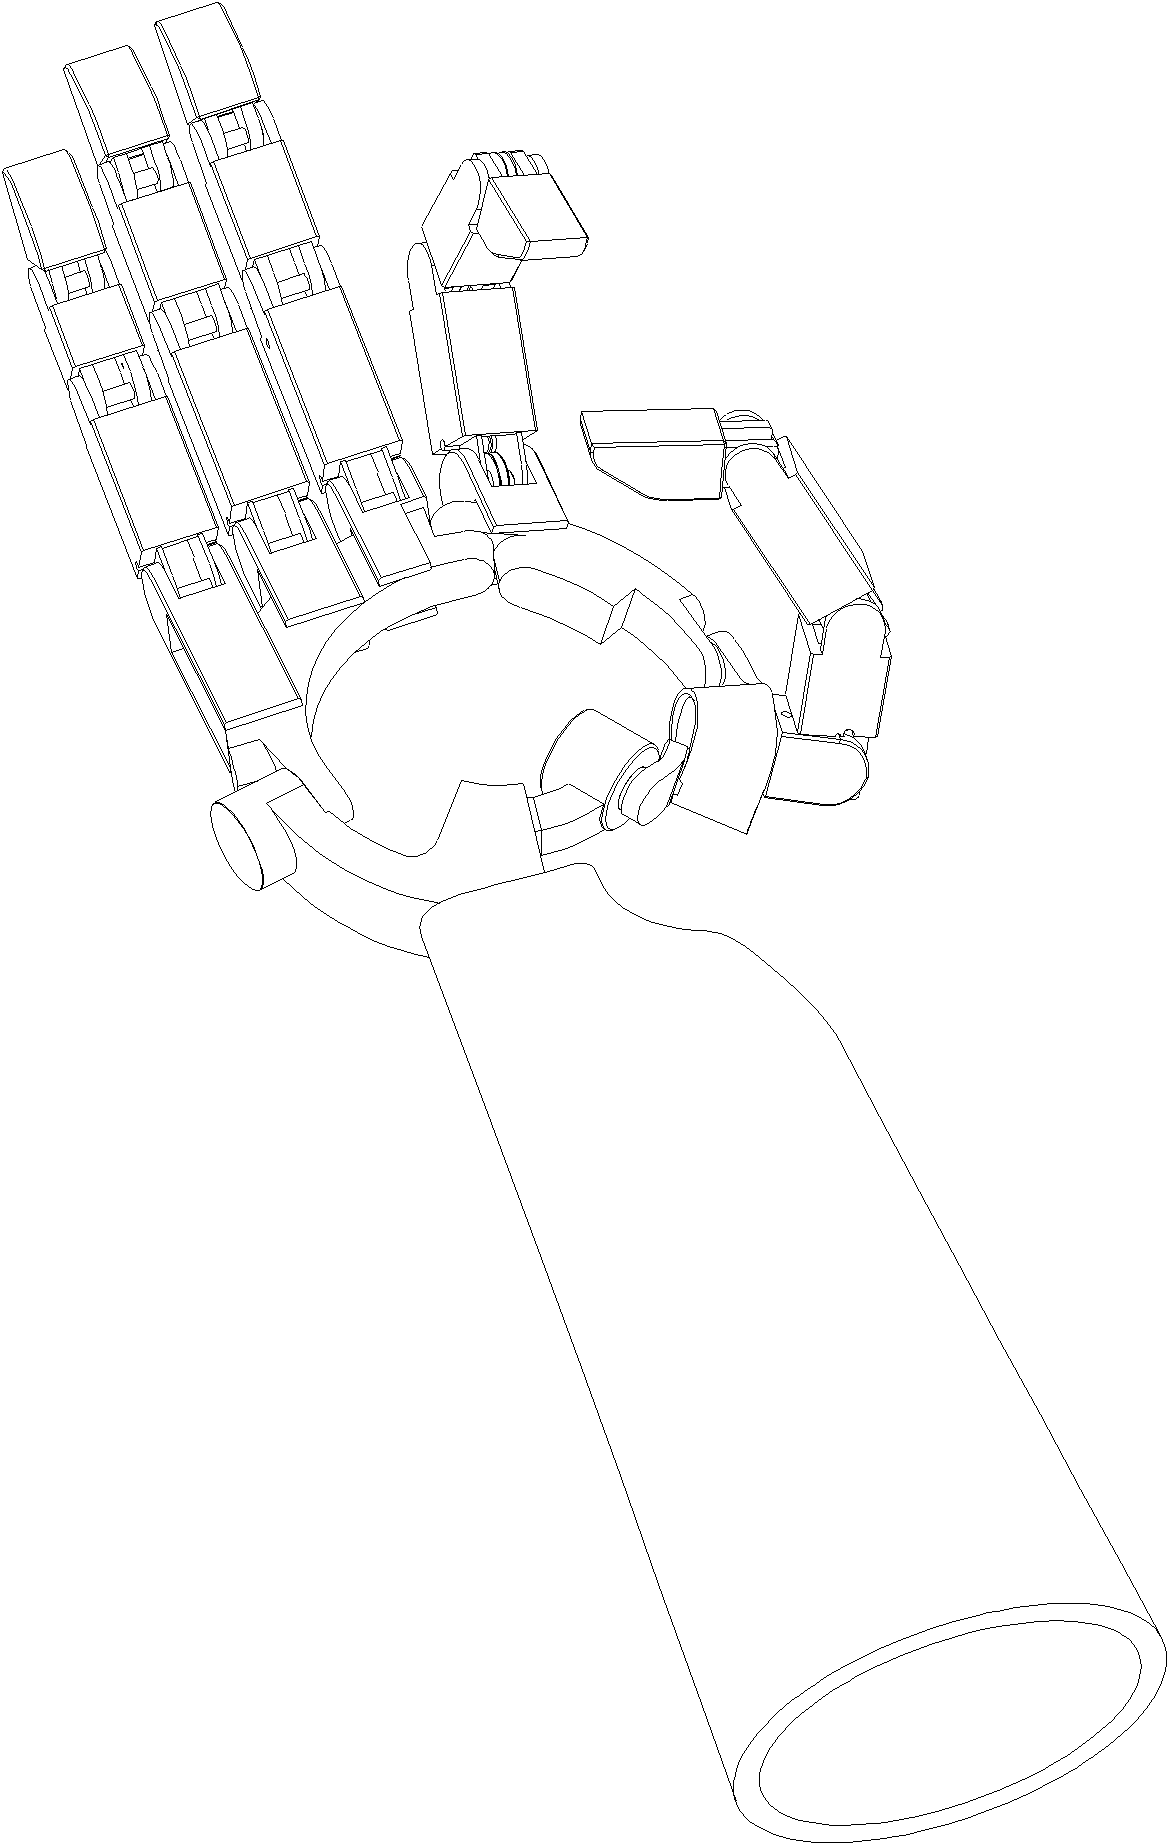 Humanoid dexterous hand with variable-shape palm